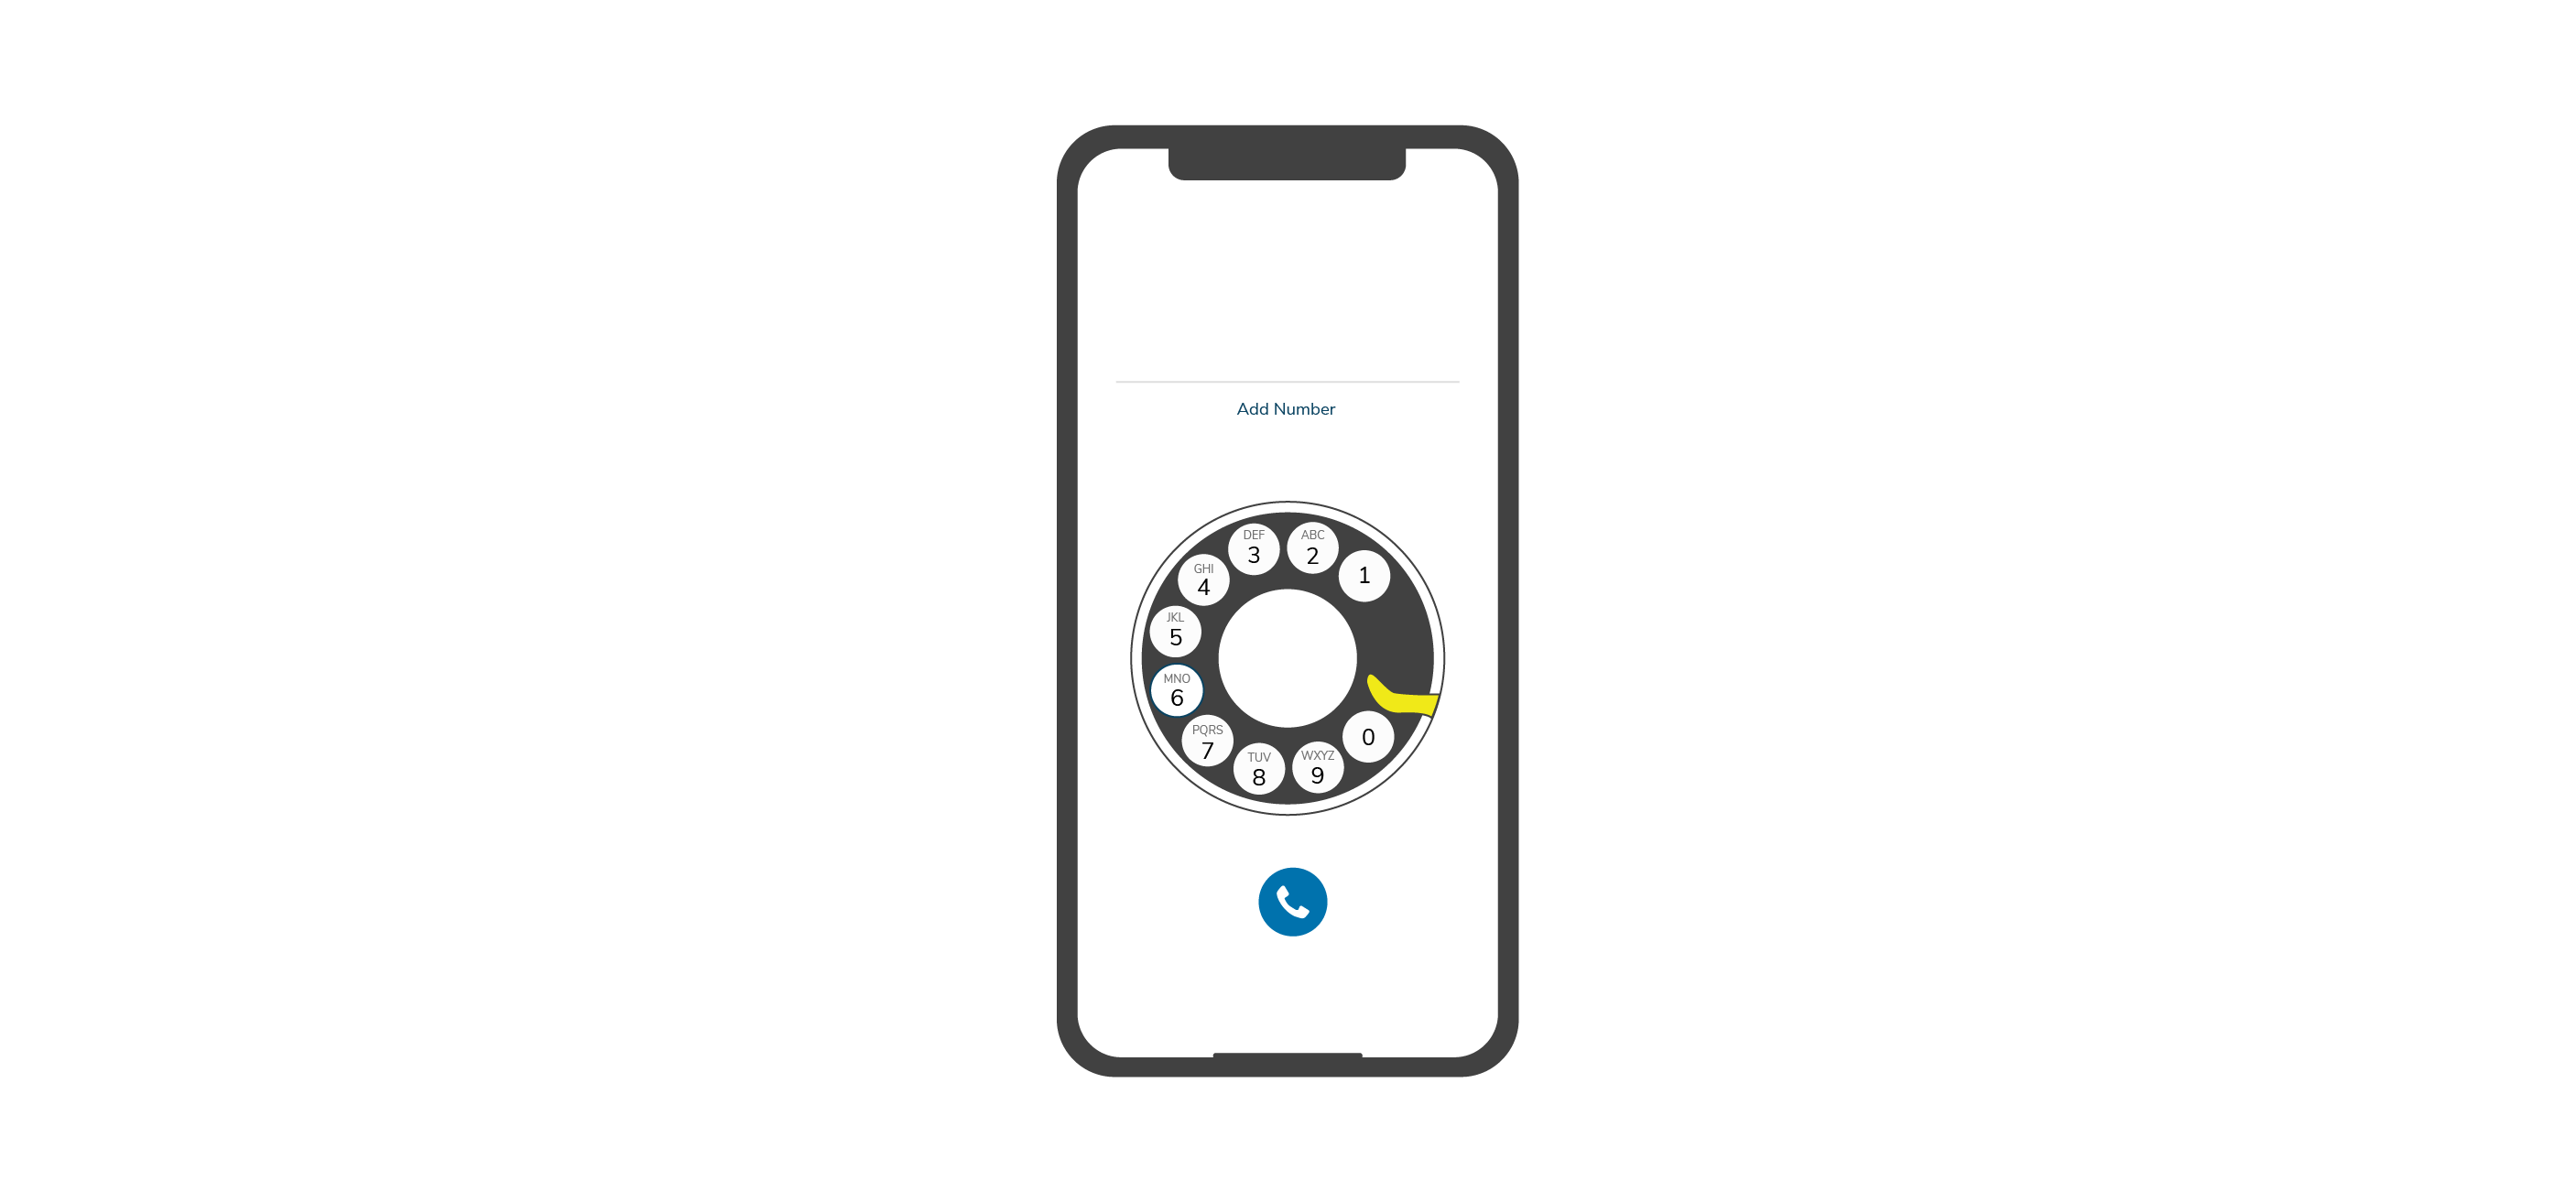 Illustration showing a rotating phone dial rather than a keypad used in a digital context